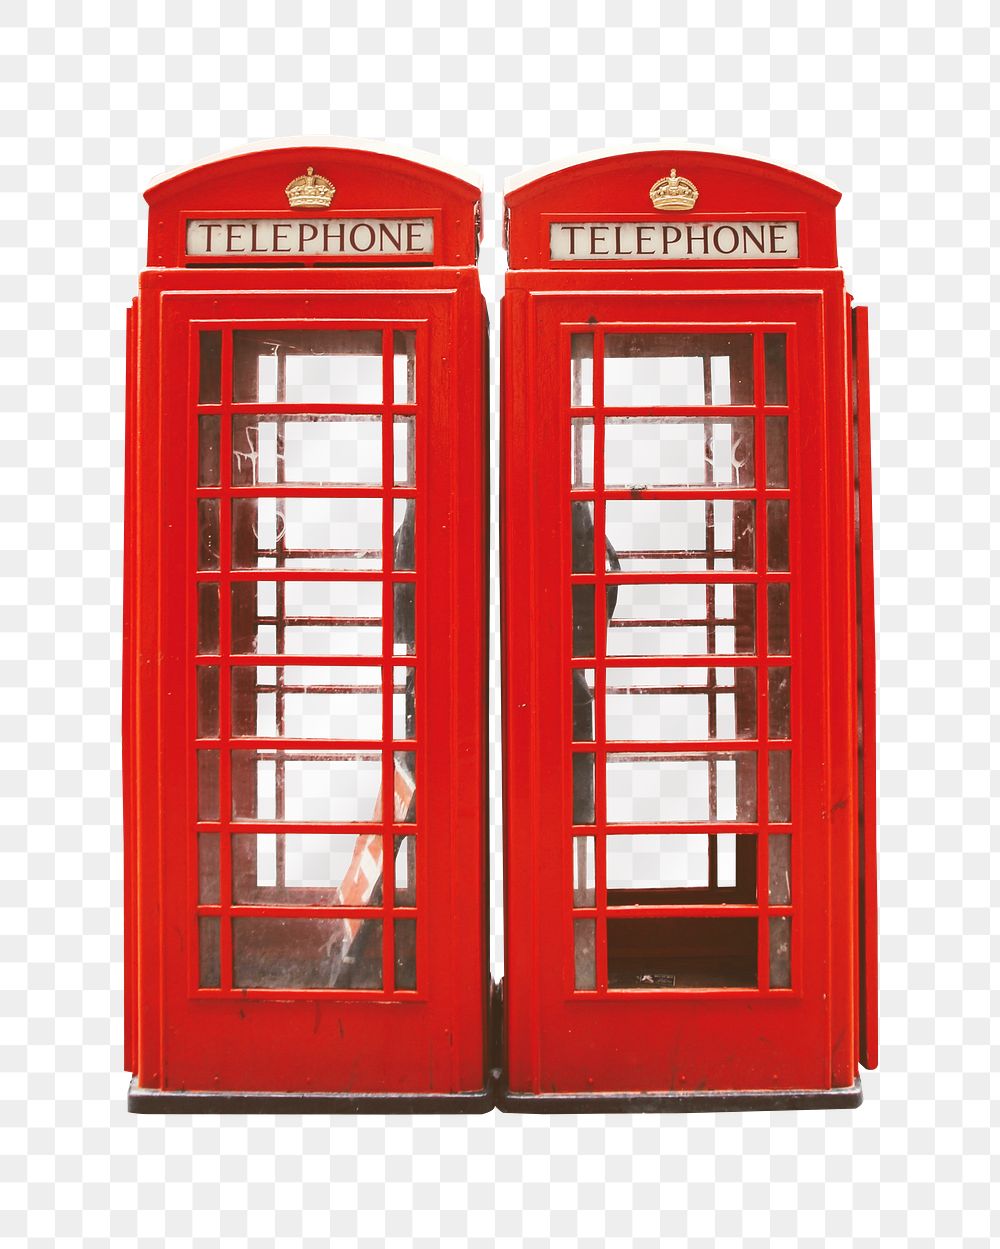 Telephone booths png London sticker, transparent background